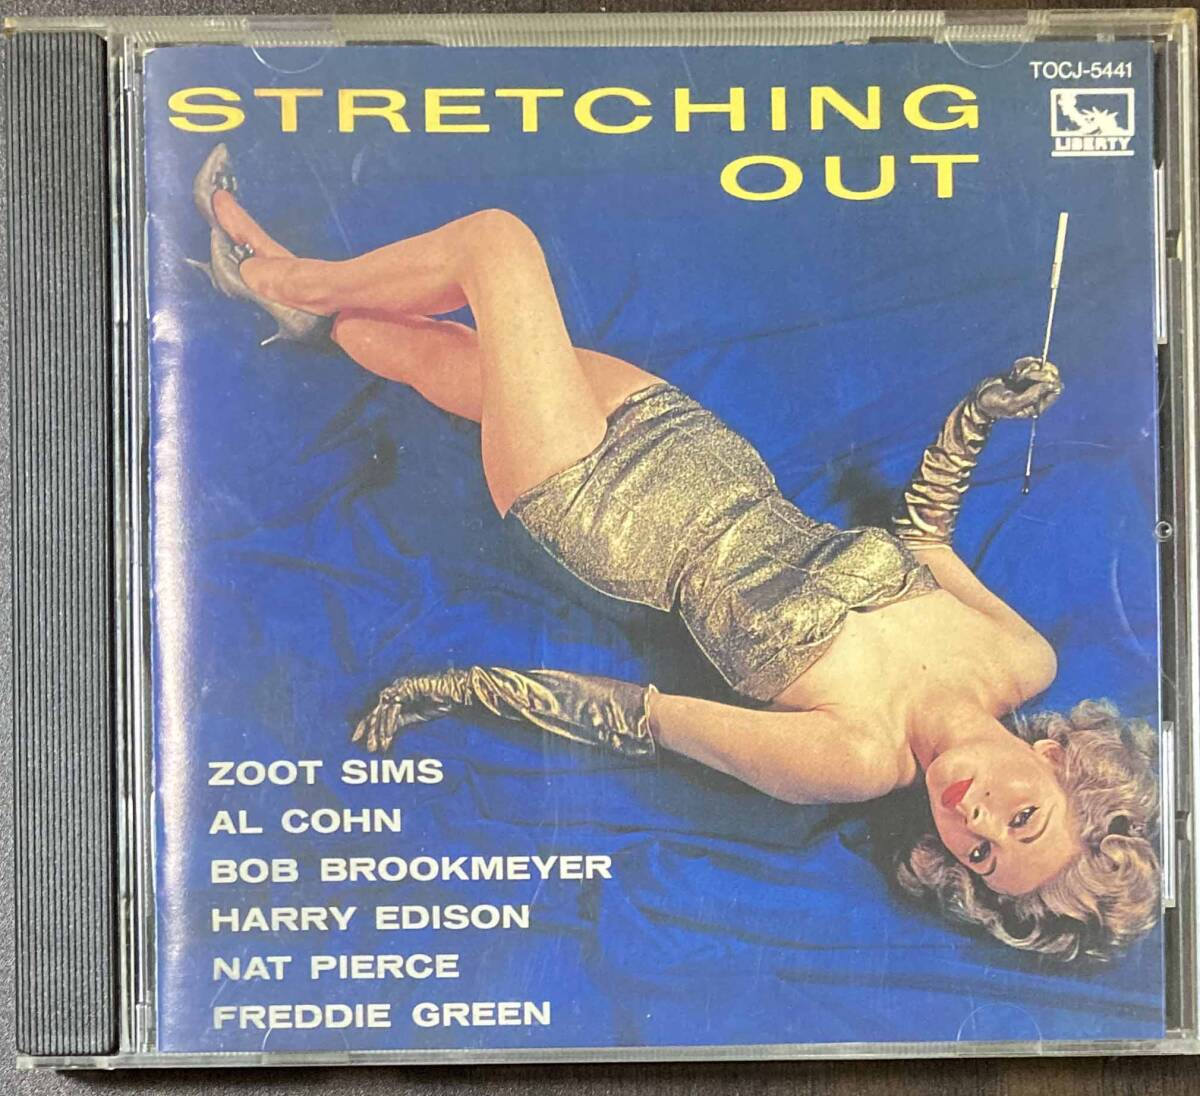 Zoot Sims & Bob Brookmeyer / Stretching Out 中古CD 国内盤 帯付きの画像2